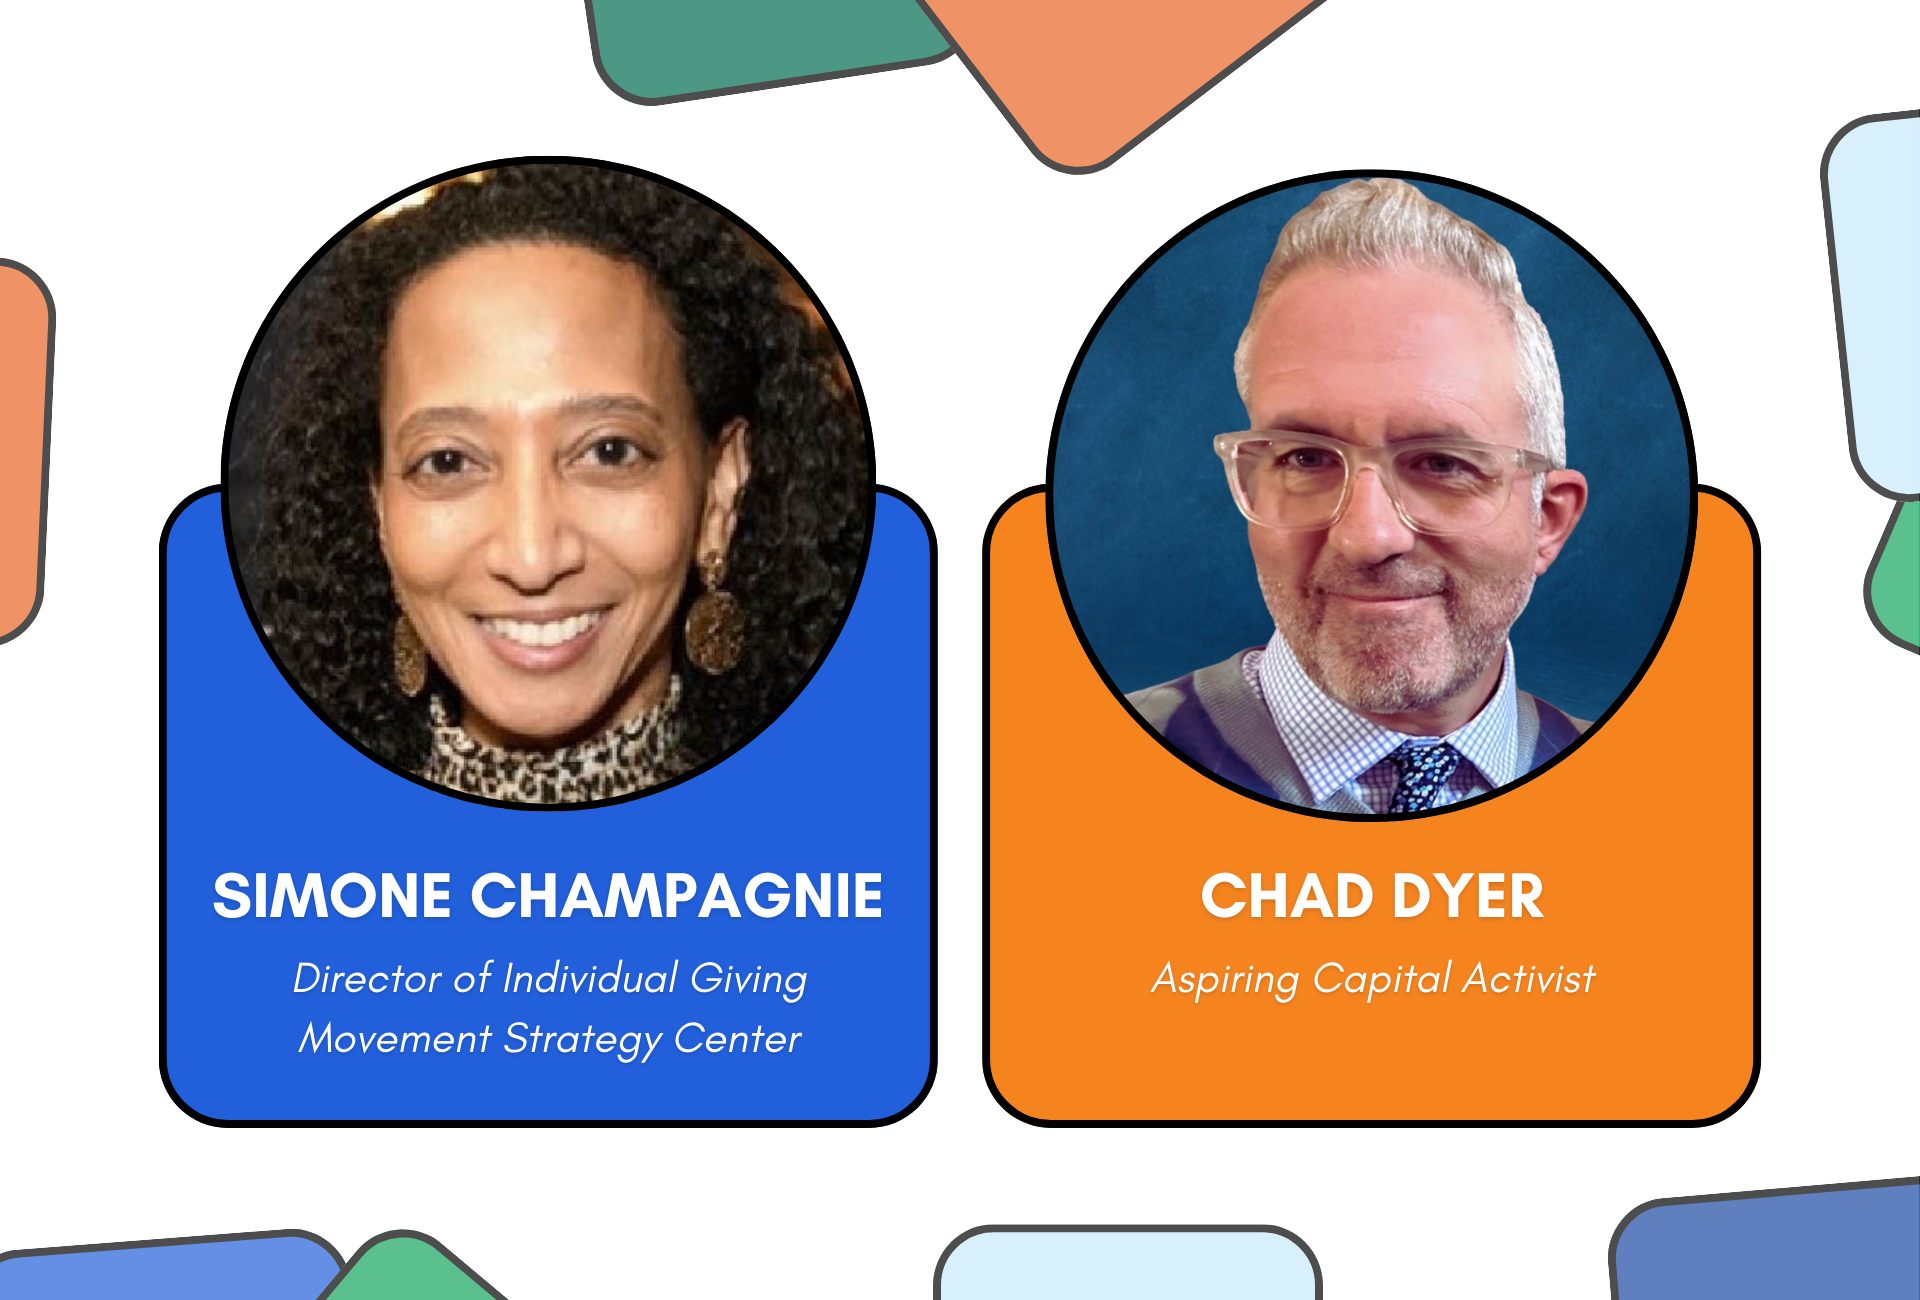 Simone Champagnie, Director of Individual Giving, Movement Strategy Center and Chad Dyer, Aspiring Capital Activist